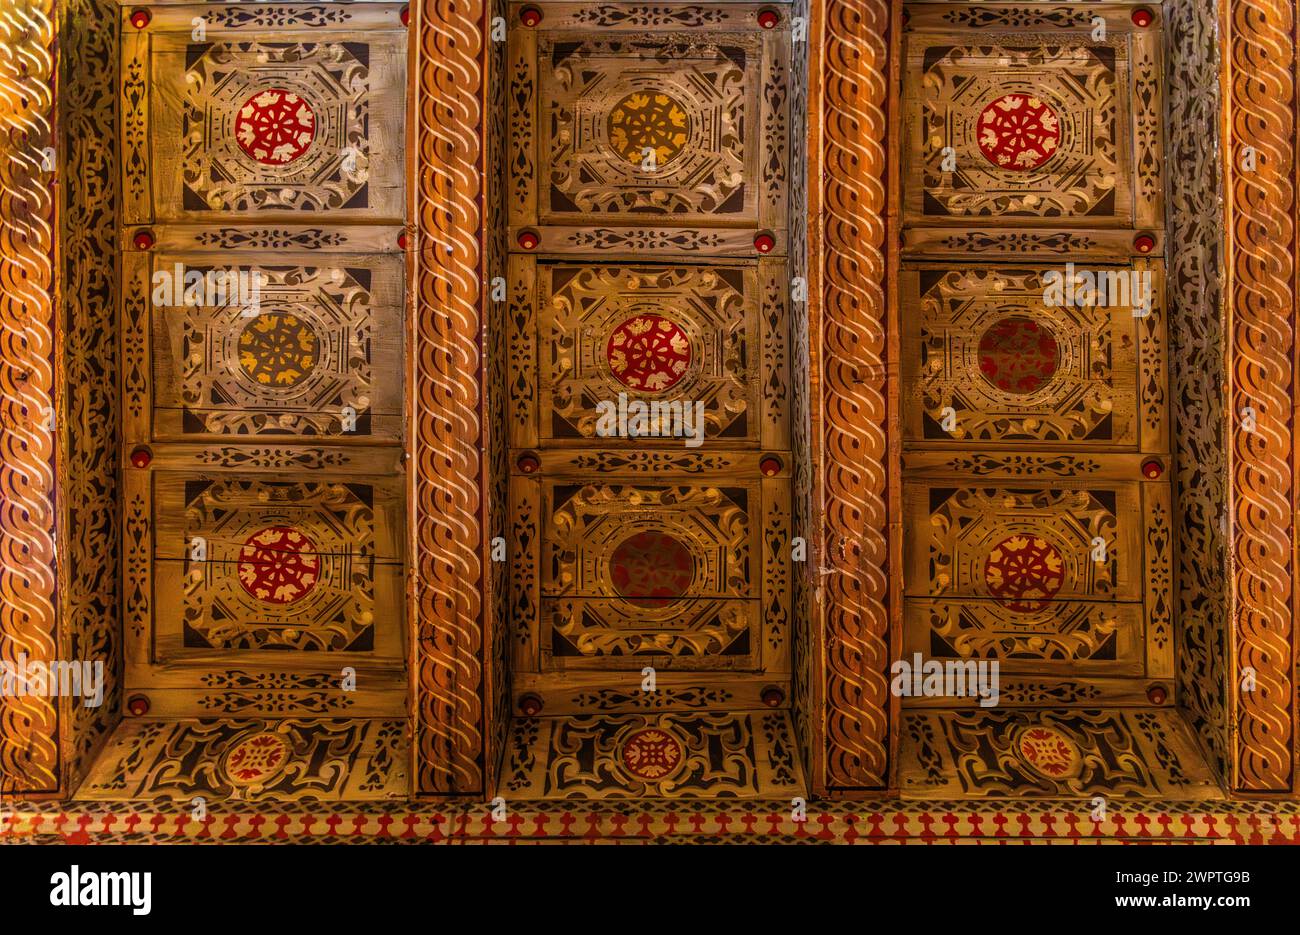 Ceiling decorations, Museo Civico d'Arte, Palzuo Ricchieri, old town centre with magnificent aristocratic palaces and Venetian-style arcades Stock Photo